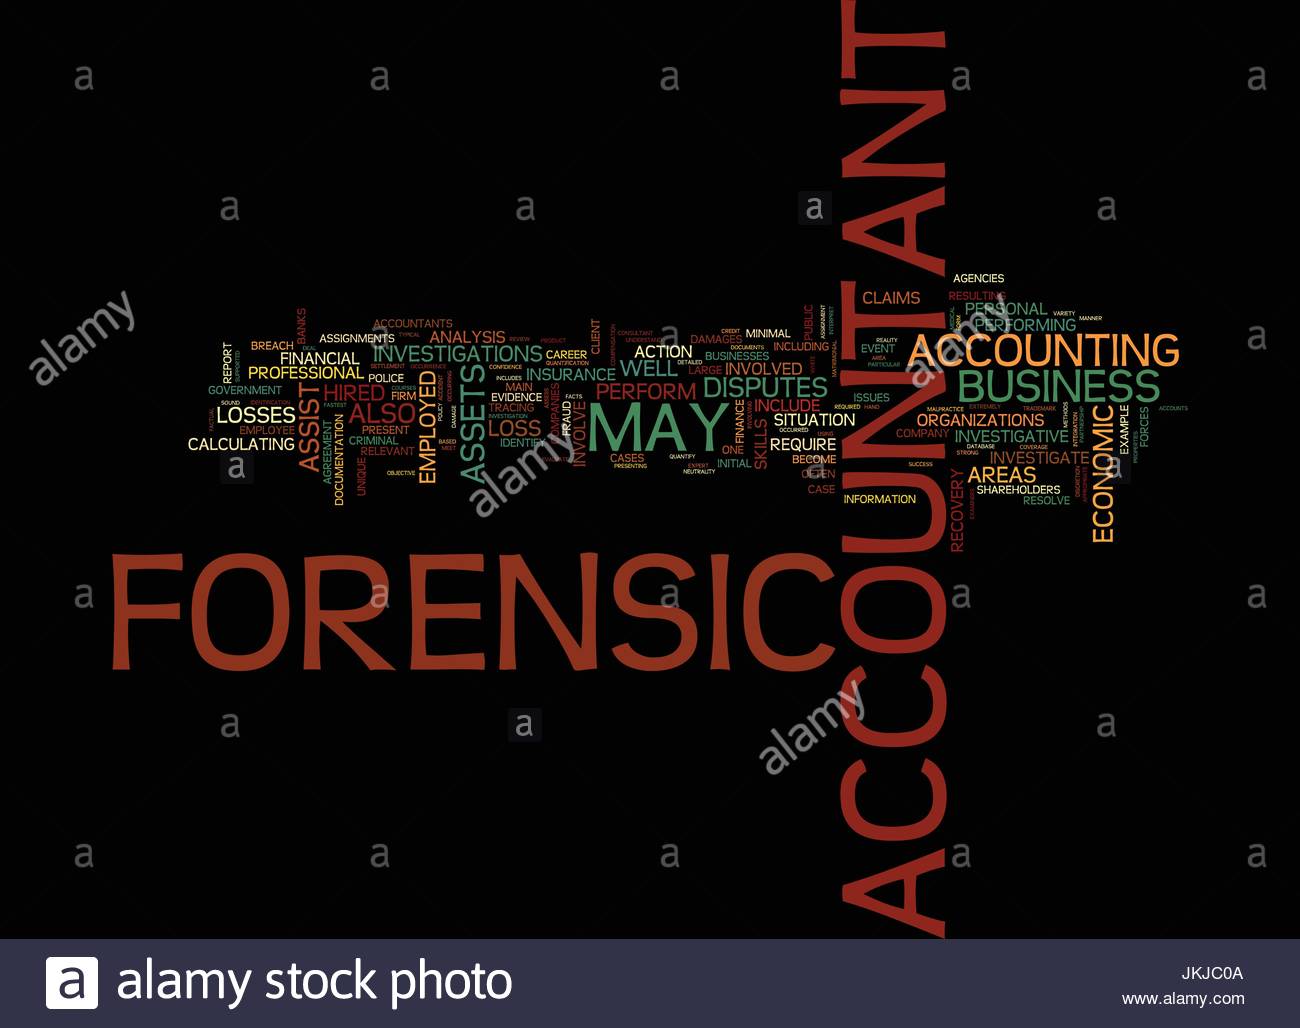 Forensic Accountant A New Career Text Background Word Cloud